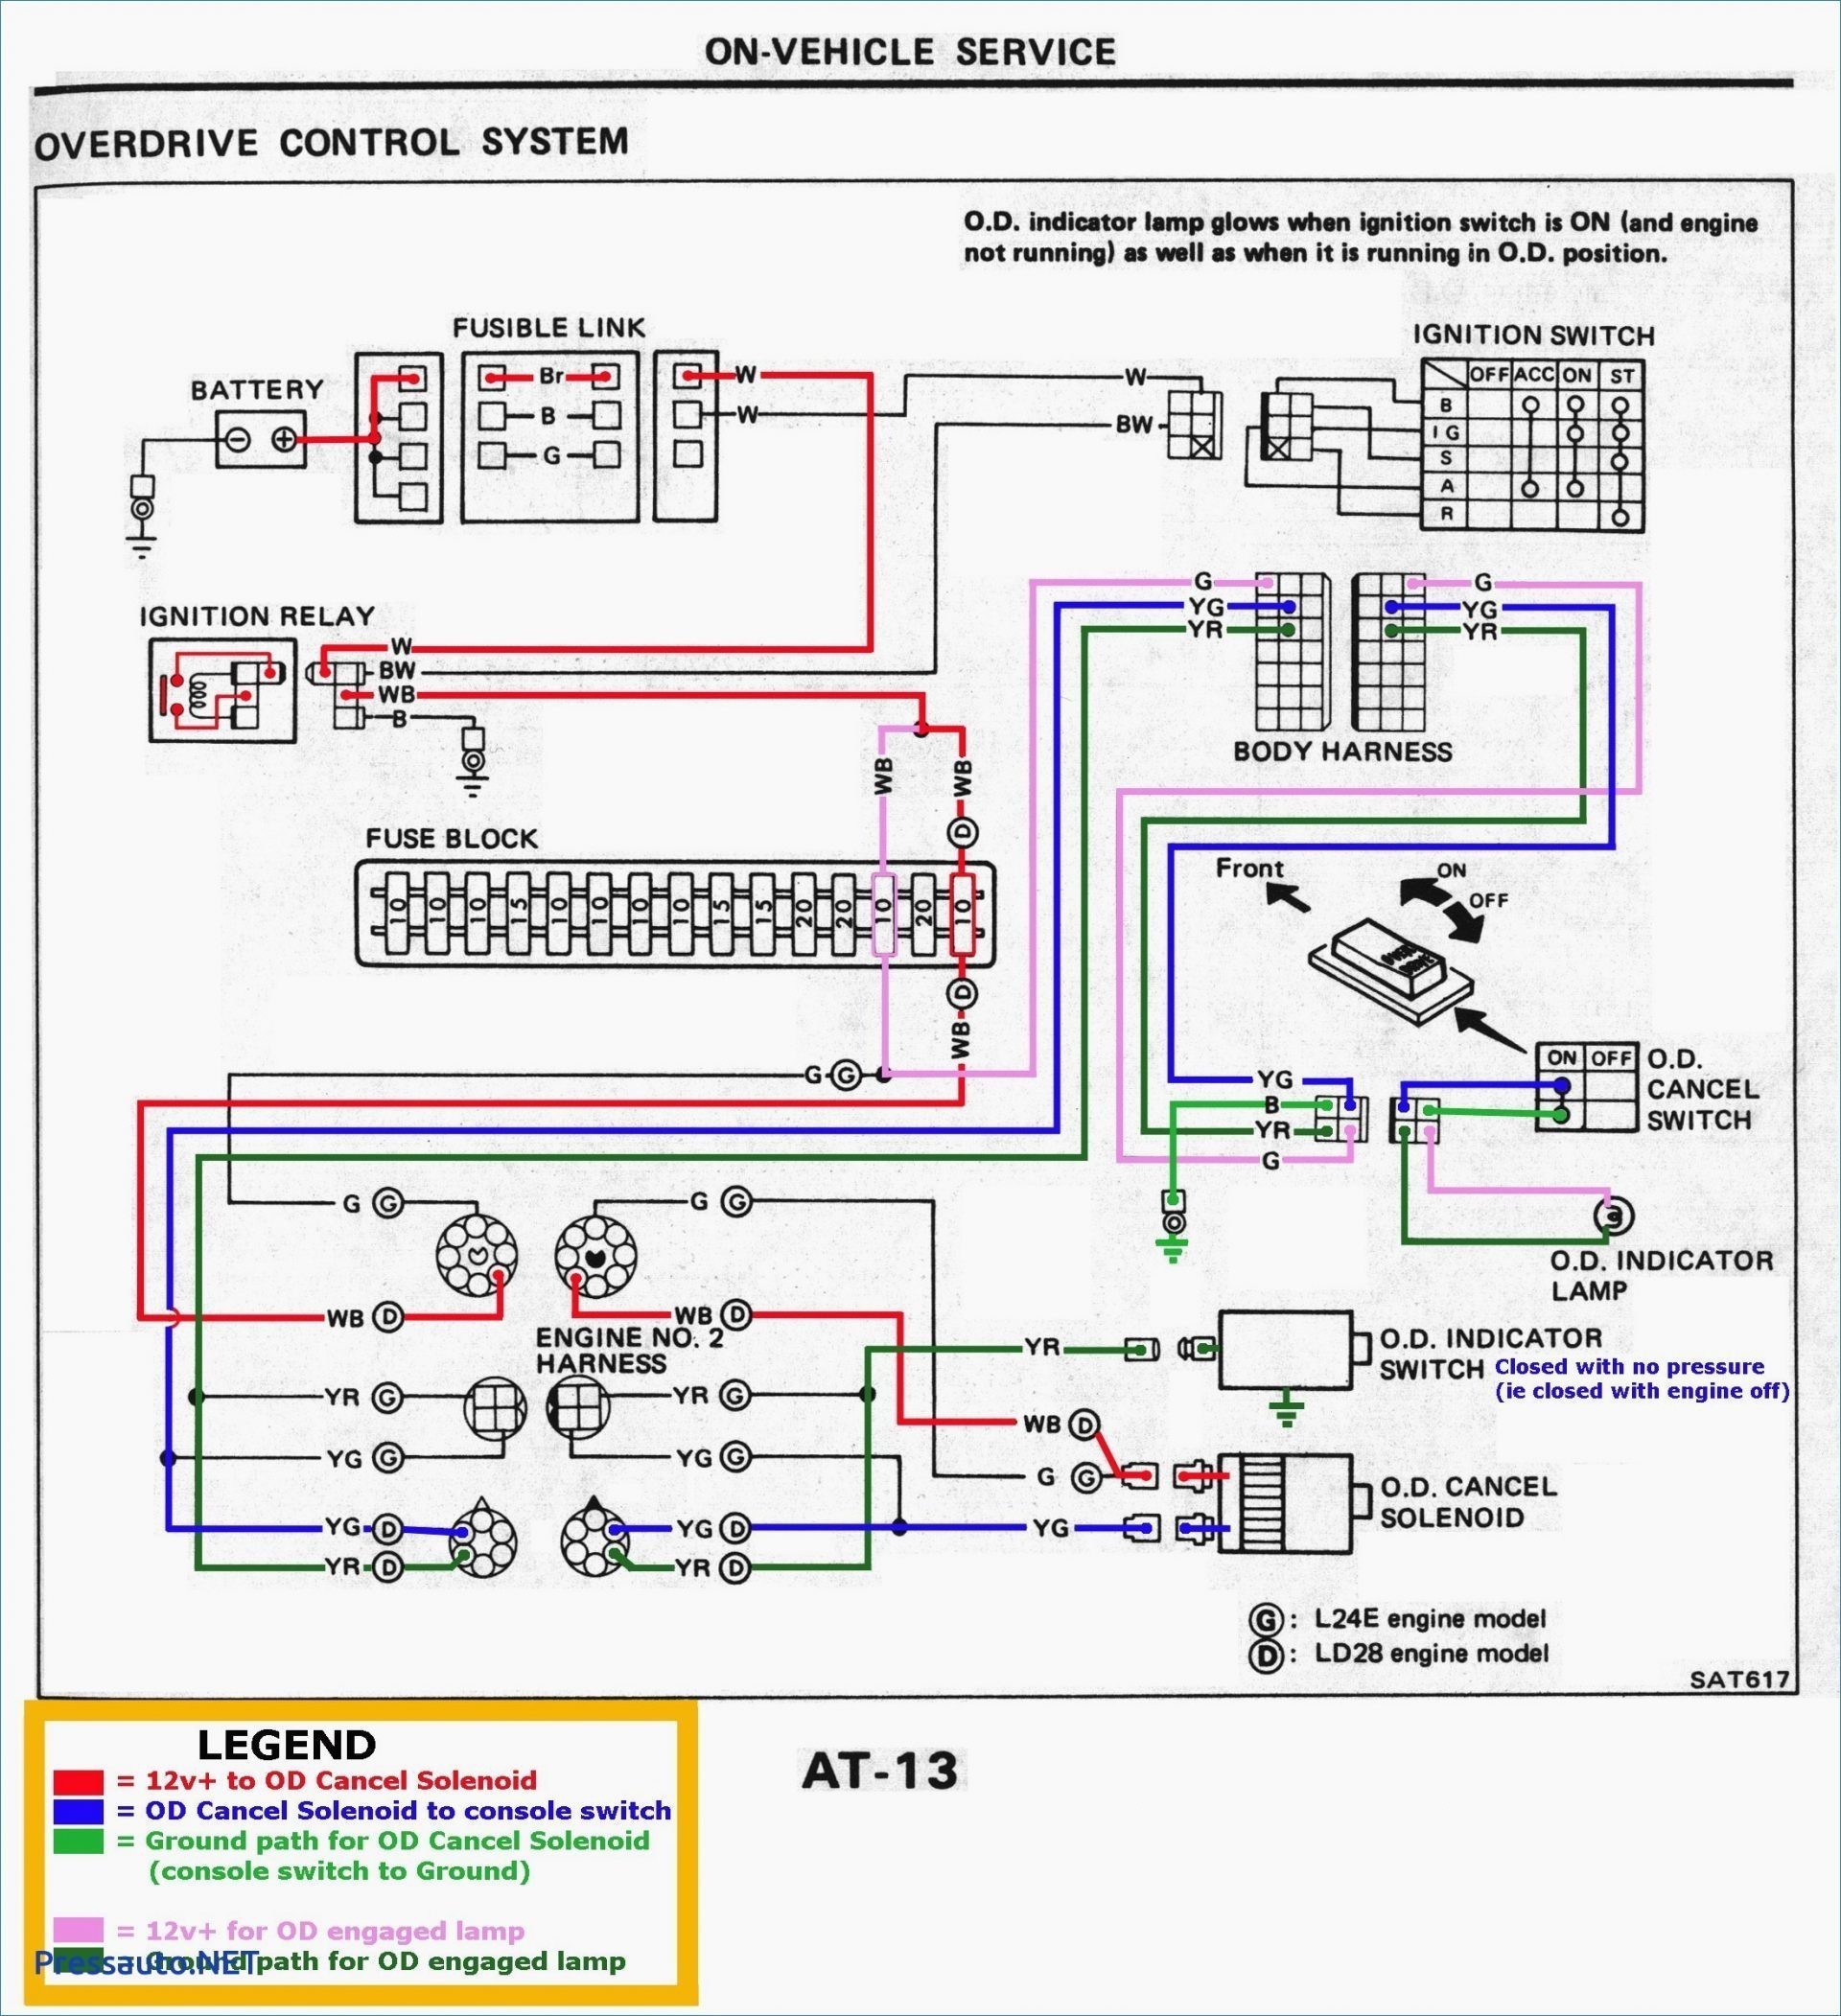 House Wiring Diagram In Pdf Fresh House Wiring Diagram Video Inspirationa House Electrical Wiring